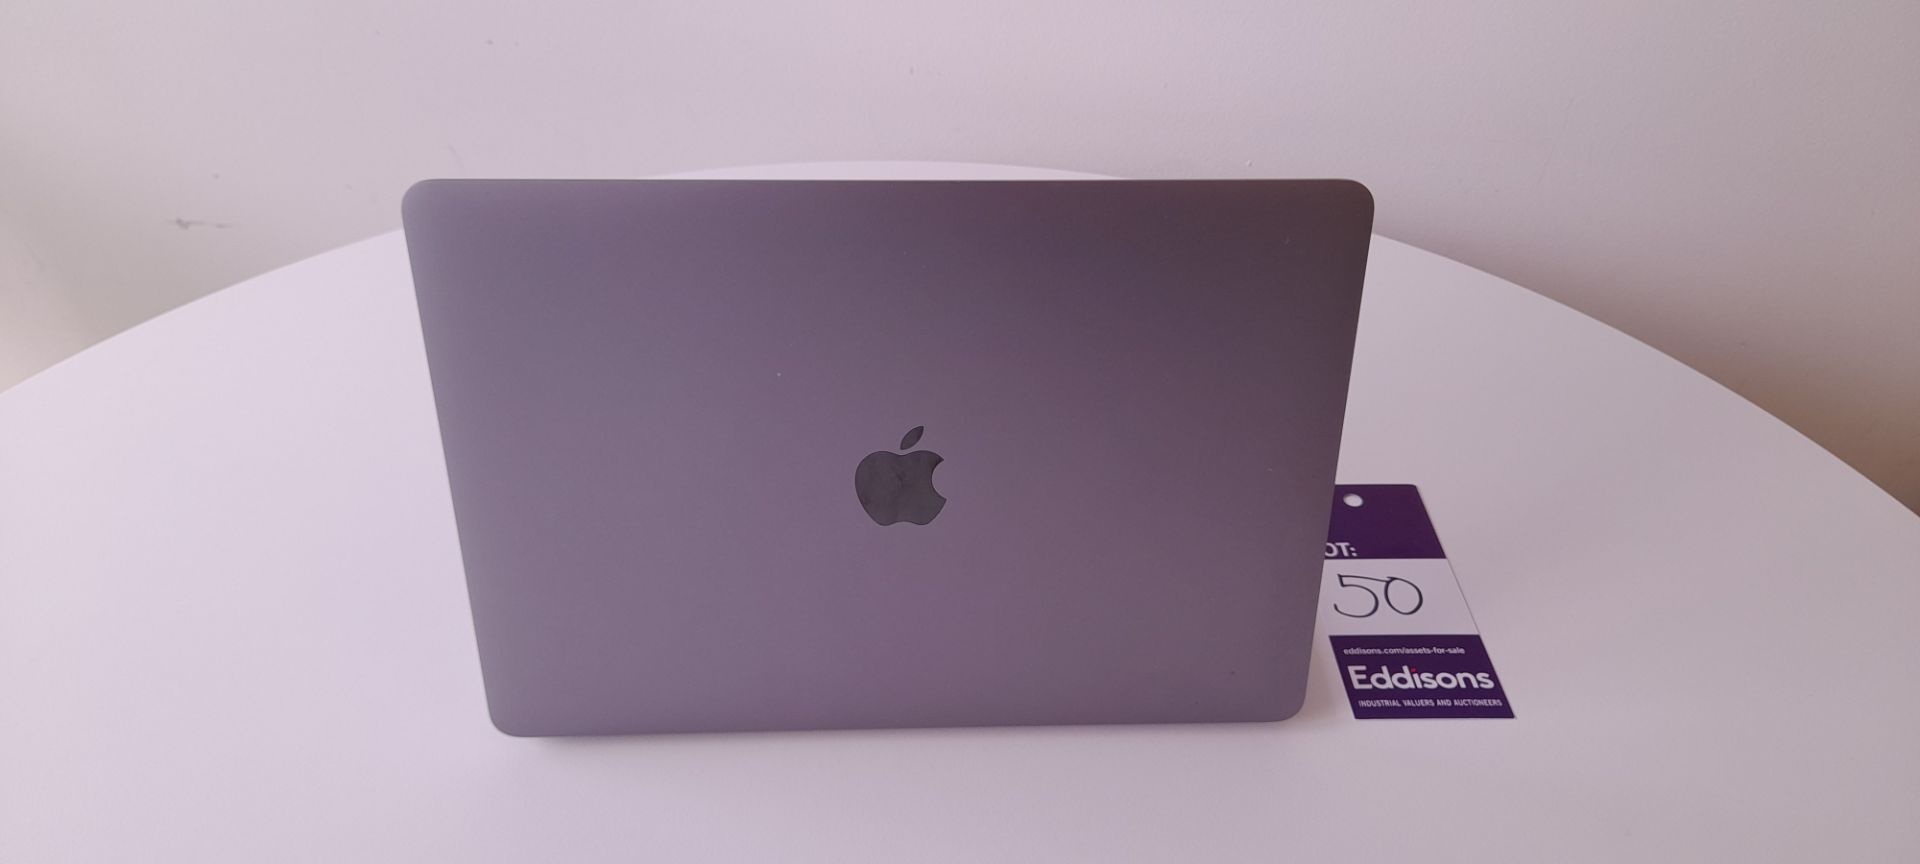 Apple MacBook Pro Model A2338 EMC3578. S/N FVFGXTD4Q05. Collection from Canary Wharf, London, E14 - Image 4 of 7